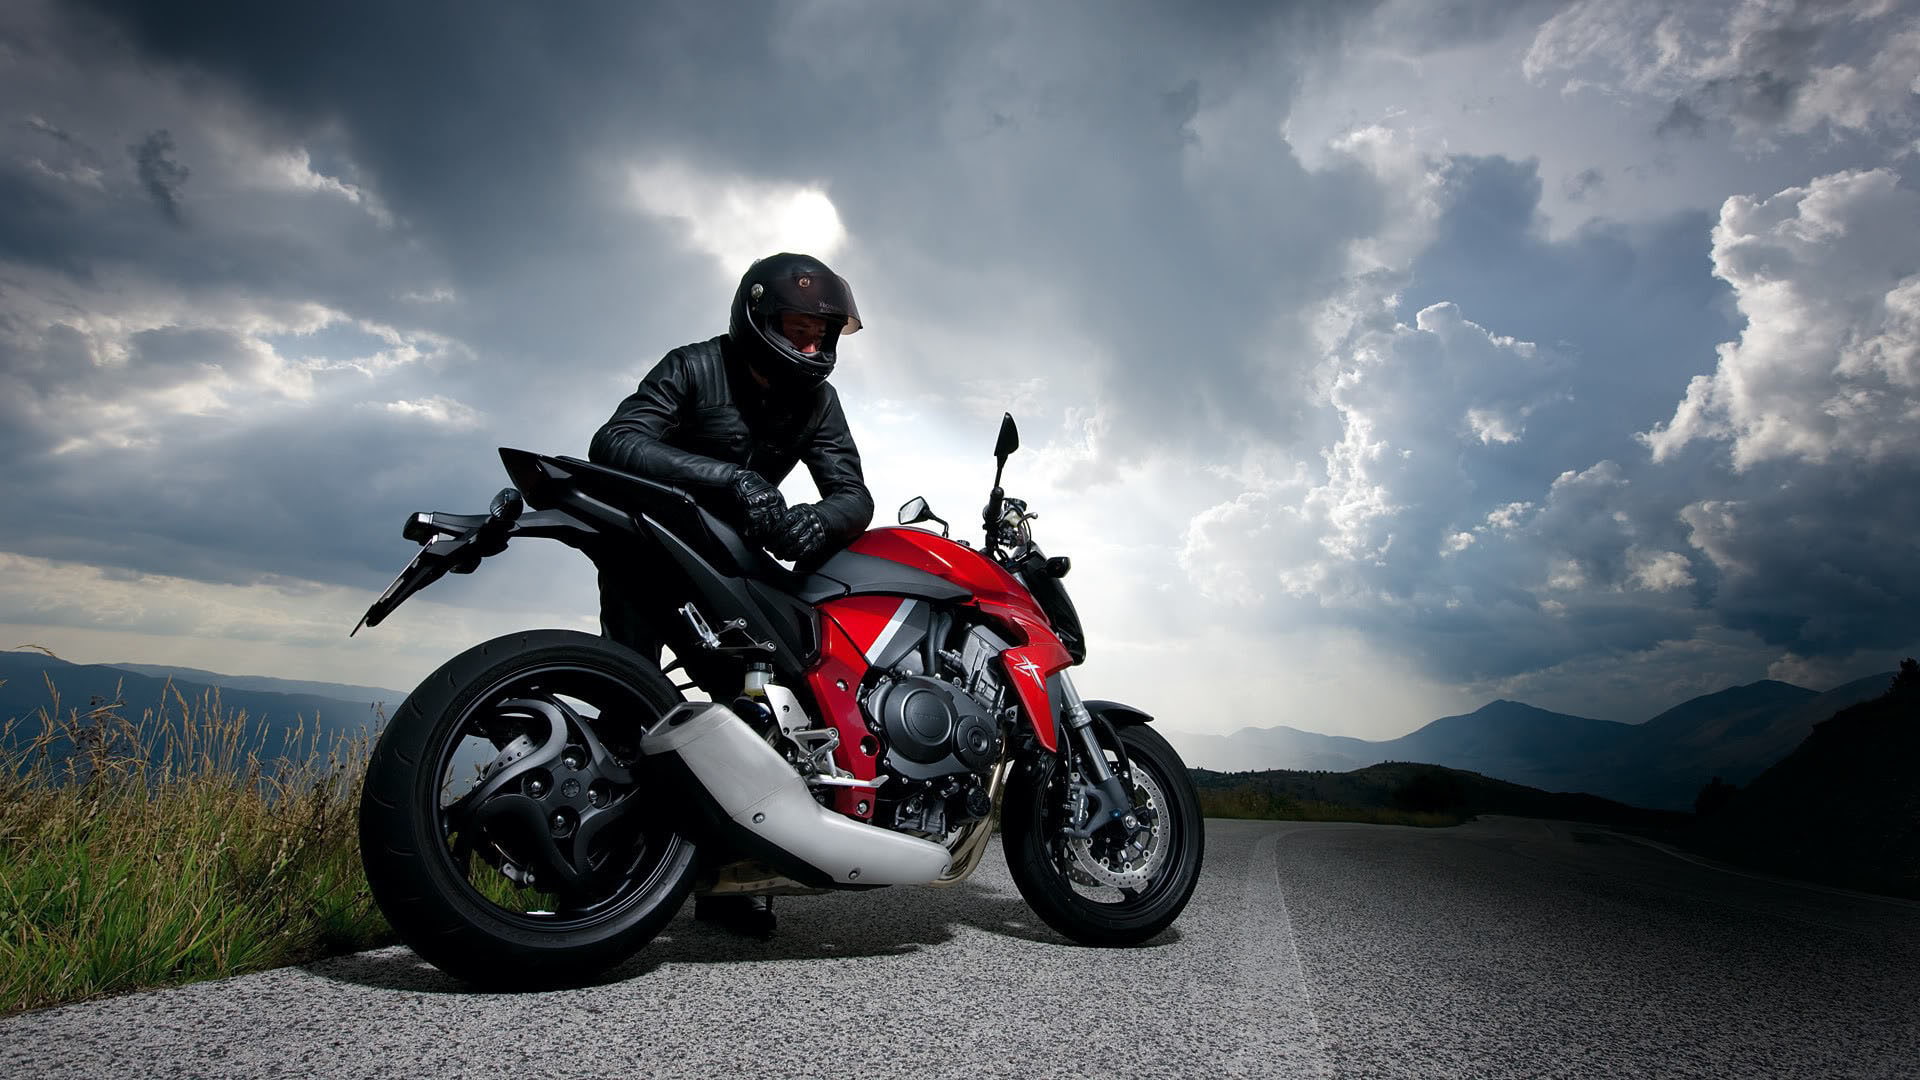 Motorcycle, Sport, Cyclist, Sky, Clouds, Road, Mountains